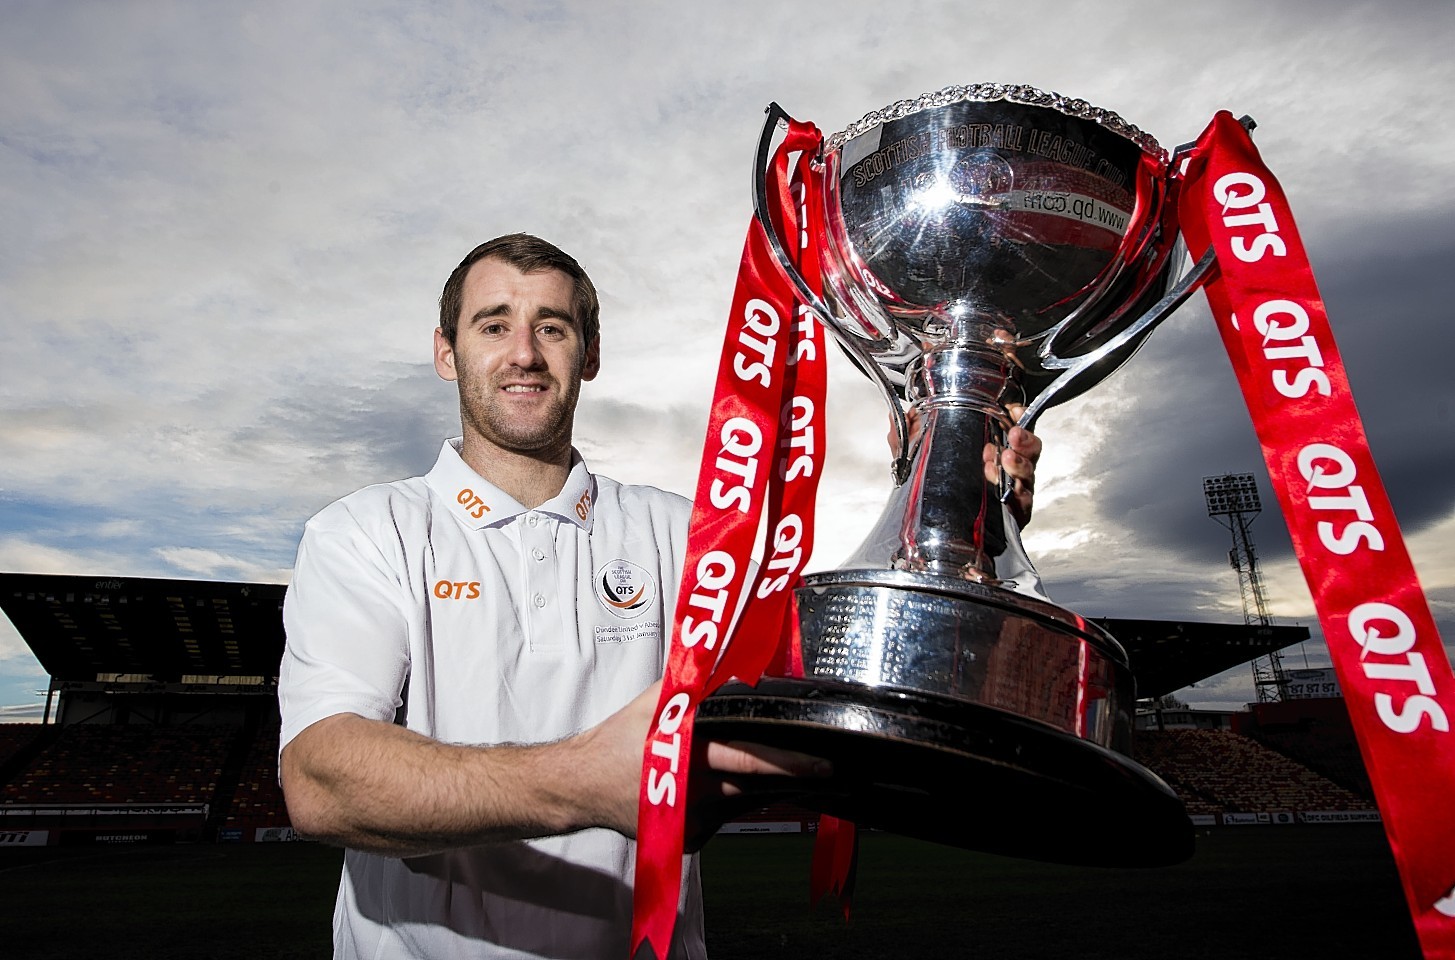 McGinn believes his team can get their hands on the trophy again